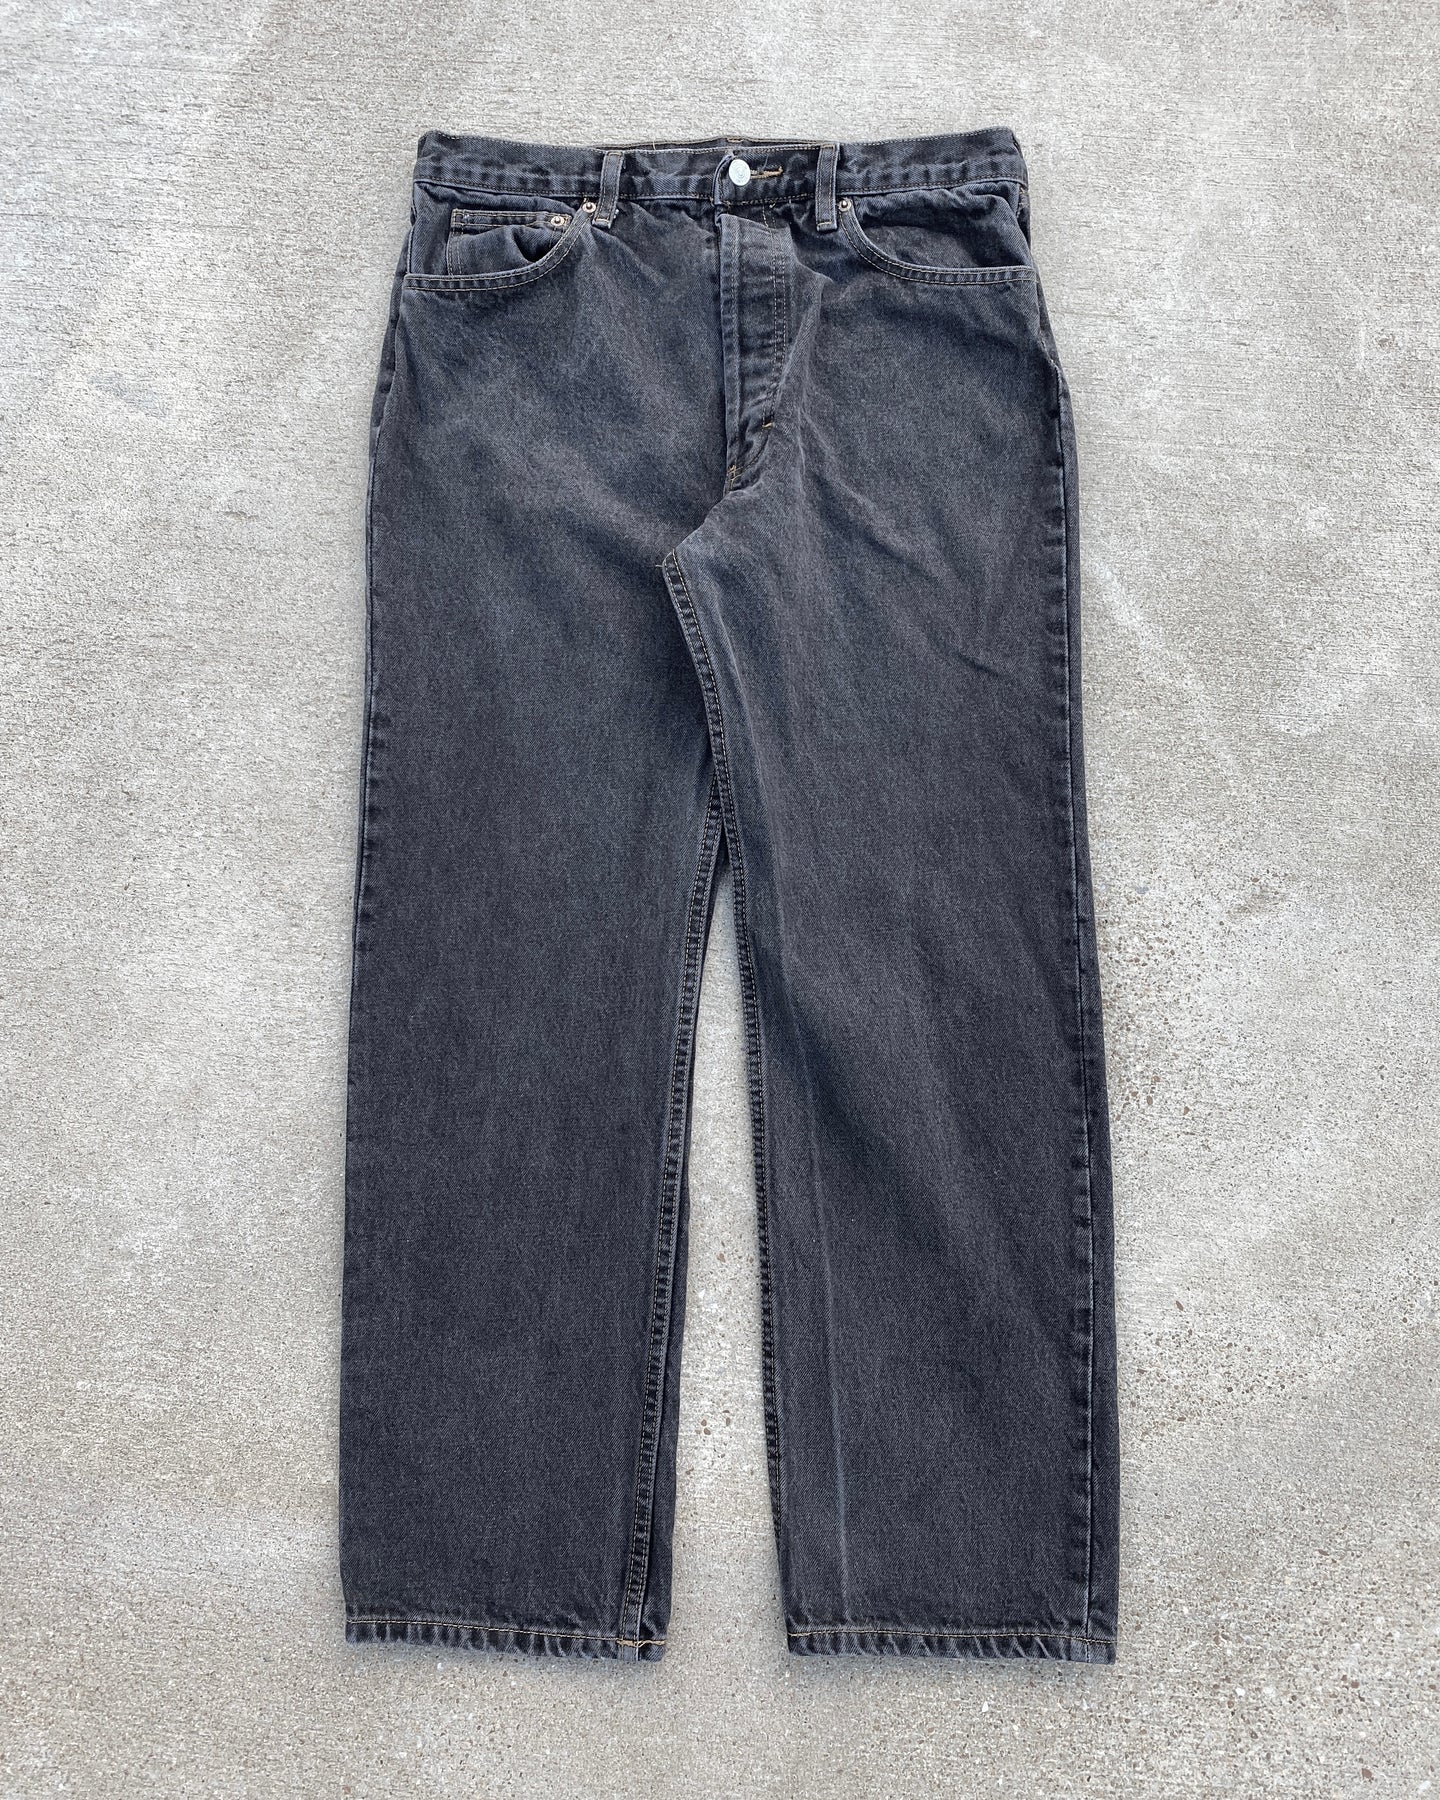 1990s Levi's Washed Black 501 with Removed Pocket - Size 33 x 30